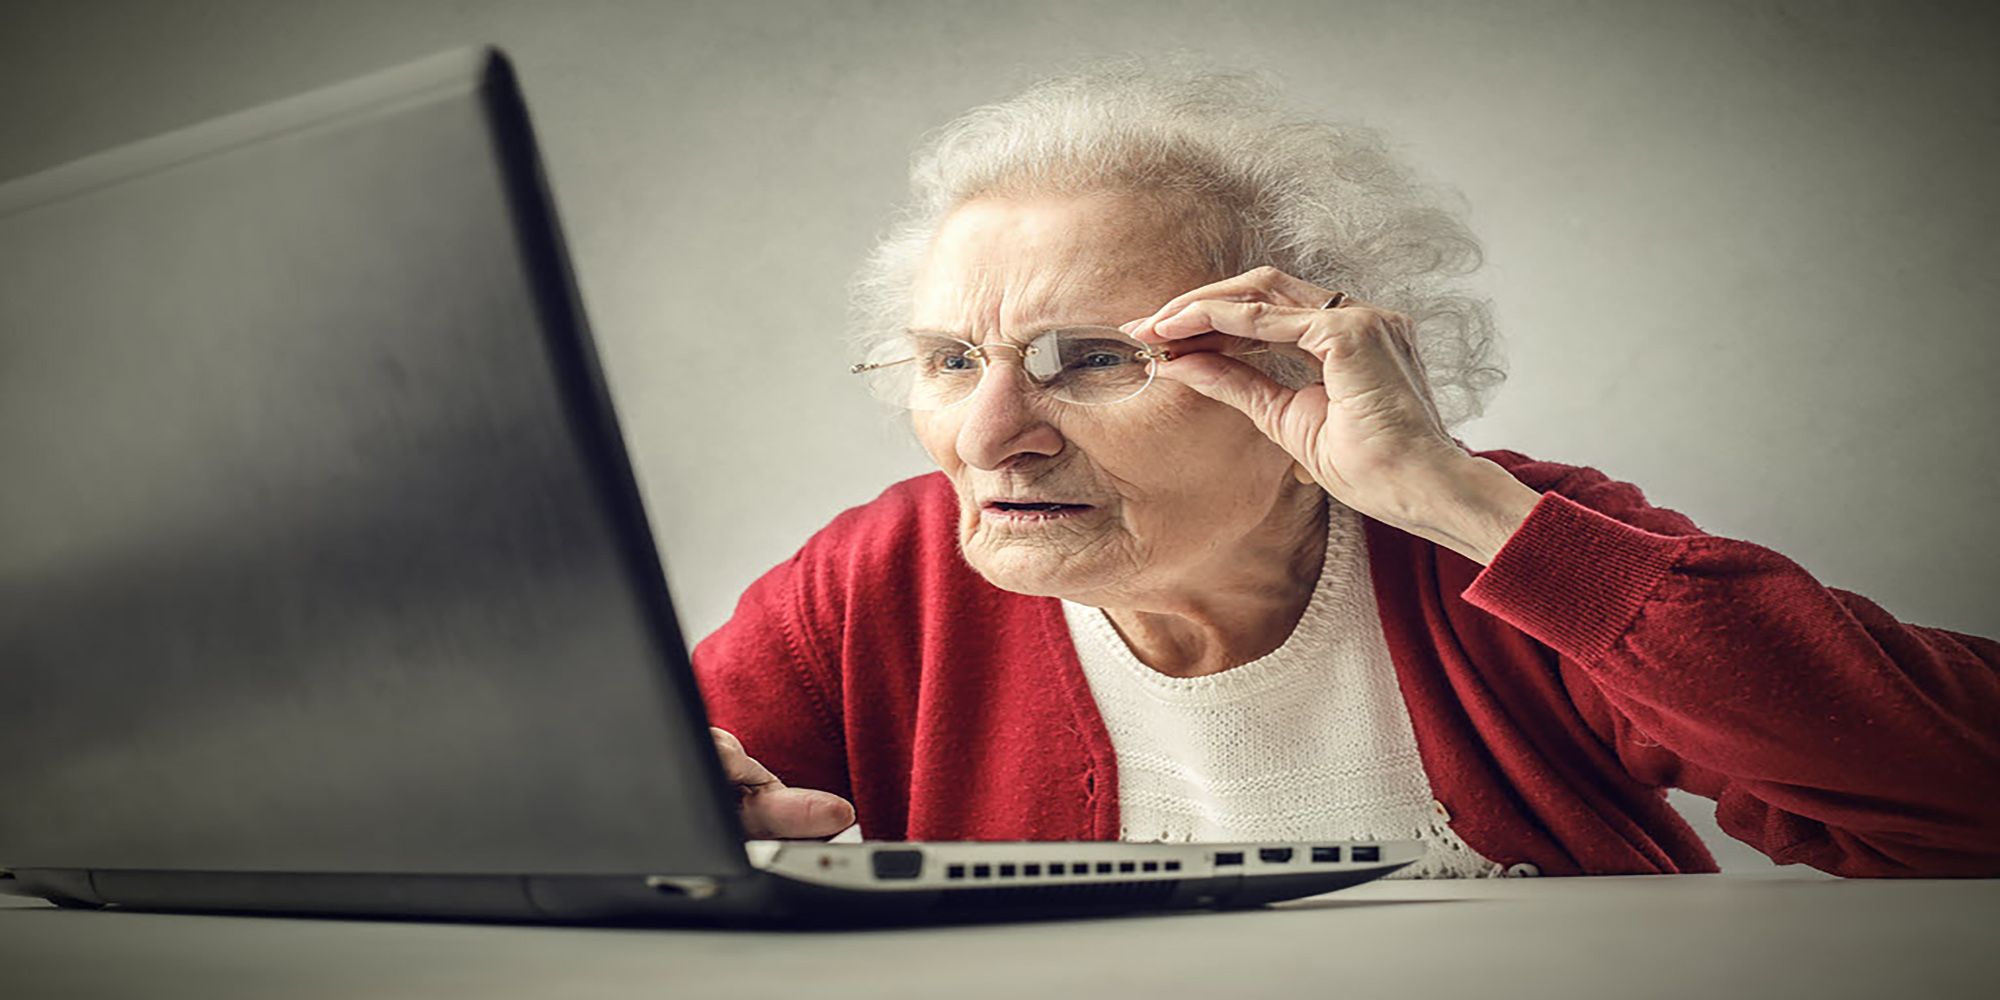 A distressed old woman stares at a laptop screen in confusion.